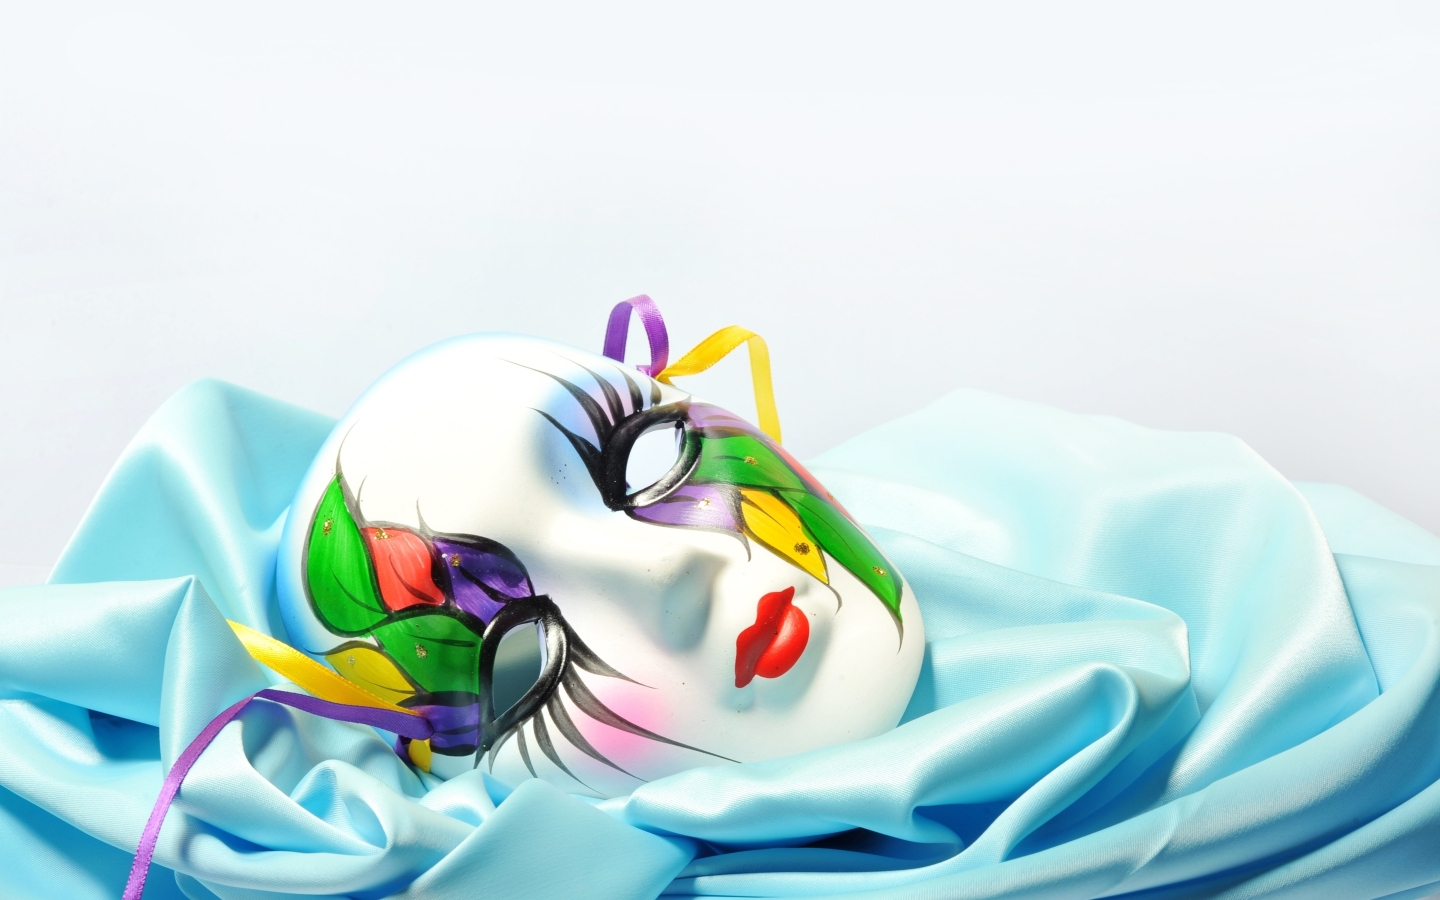 Lady Mask for 1440 x 900 widescreen resolution